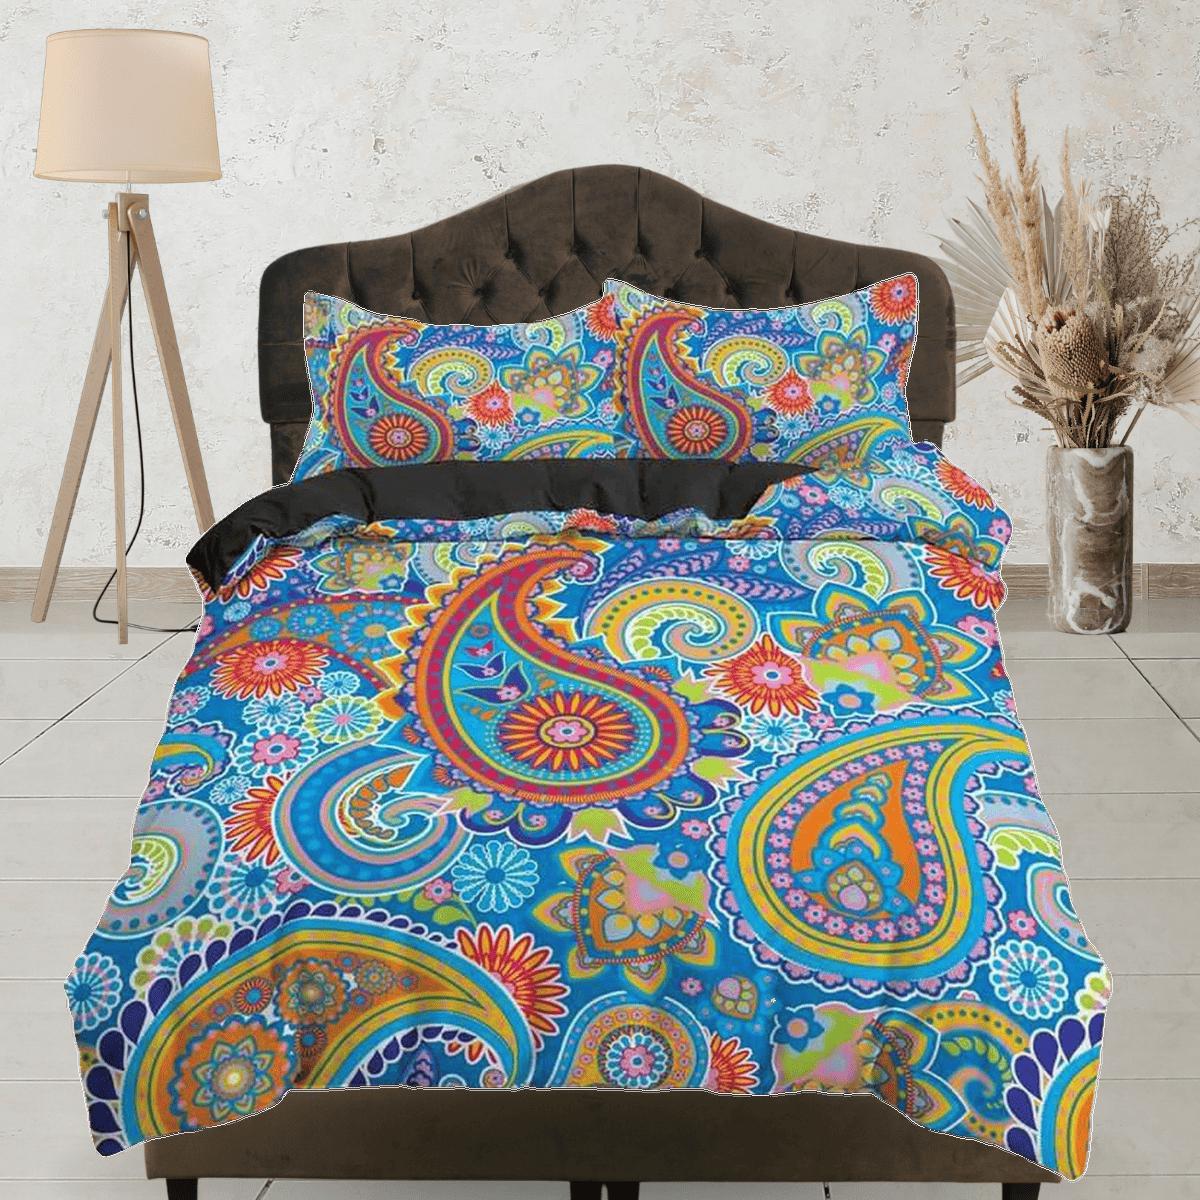 daintyduvet Colorful paisley blue duvet cover set, aesthetic room decor bedding set full, king, queen size, abstract boho bedspread, luxury bed cover